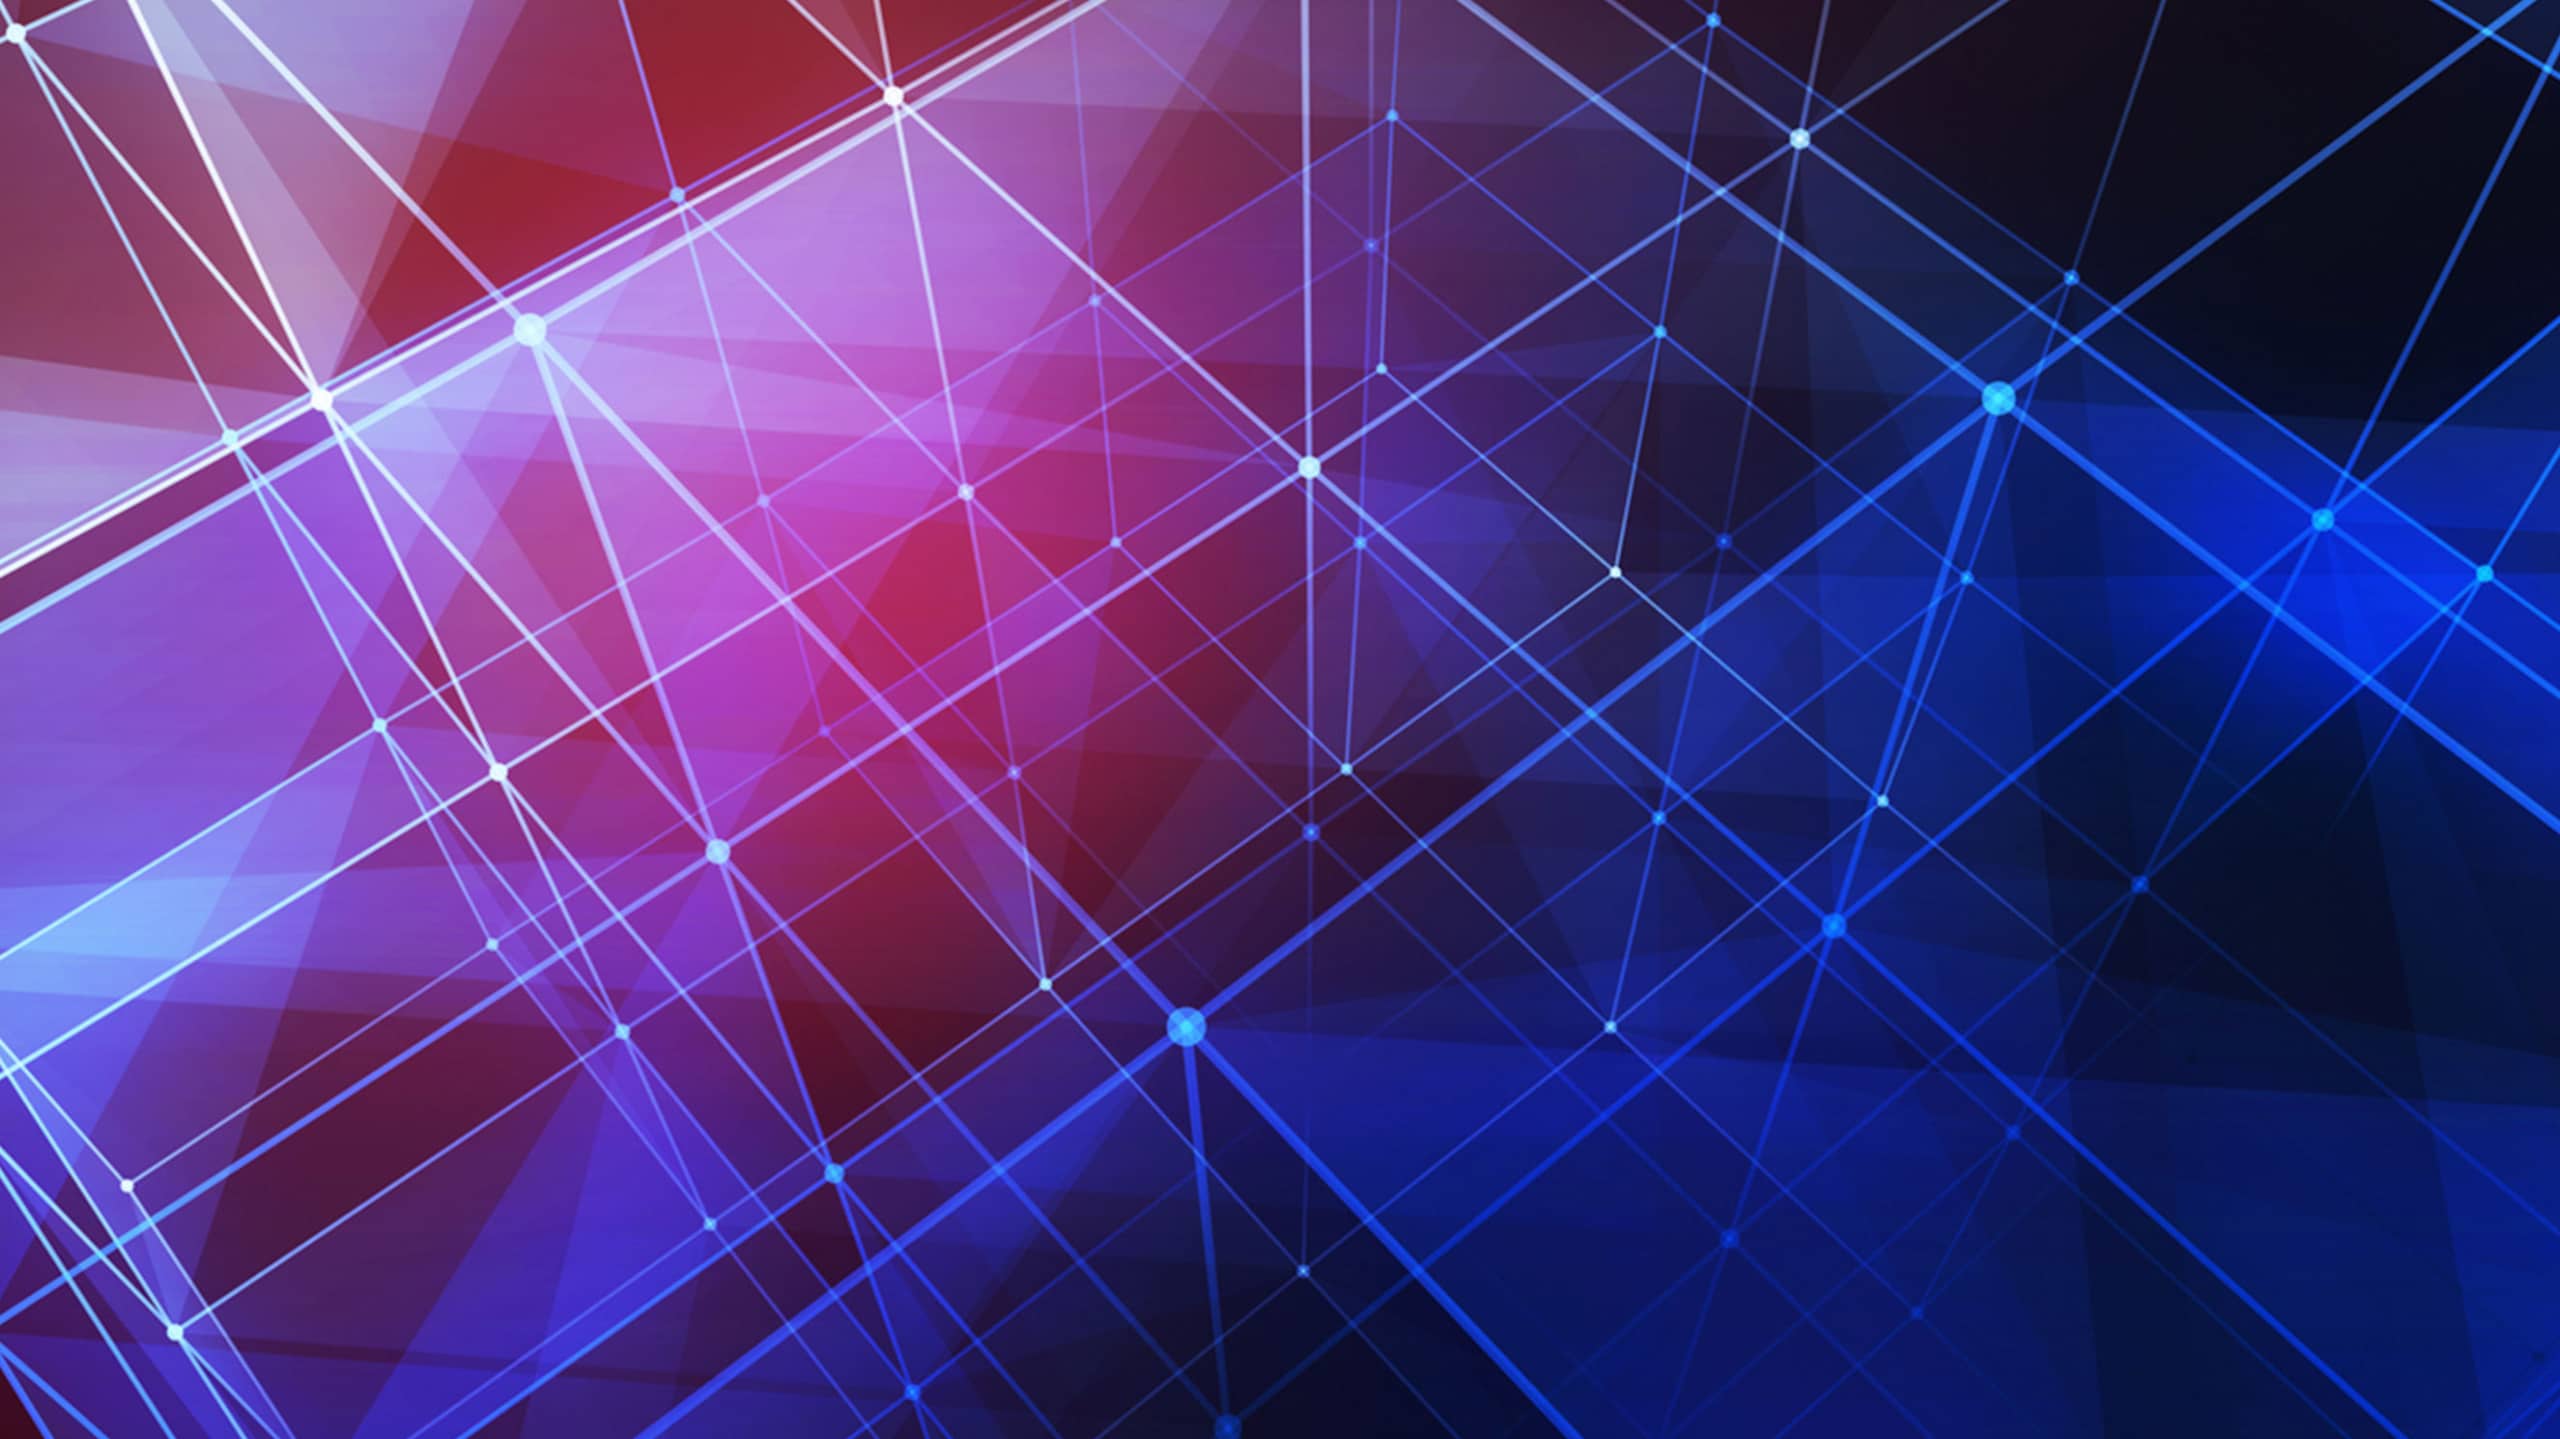 Abstract geometric background featuring a blend of blue and red hues with white intersecting lines forming multiple triangles across the image, designed to explore what's new with Iris Investigate.